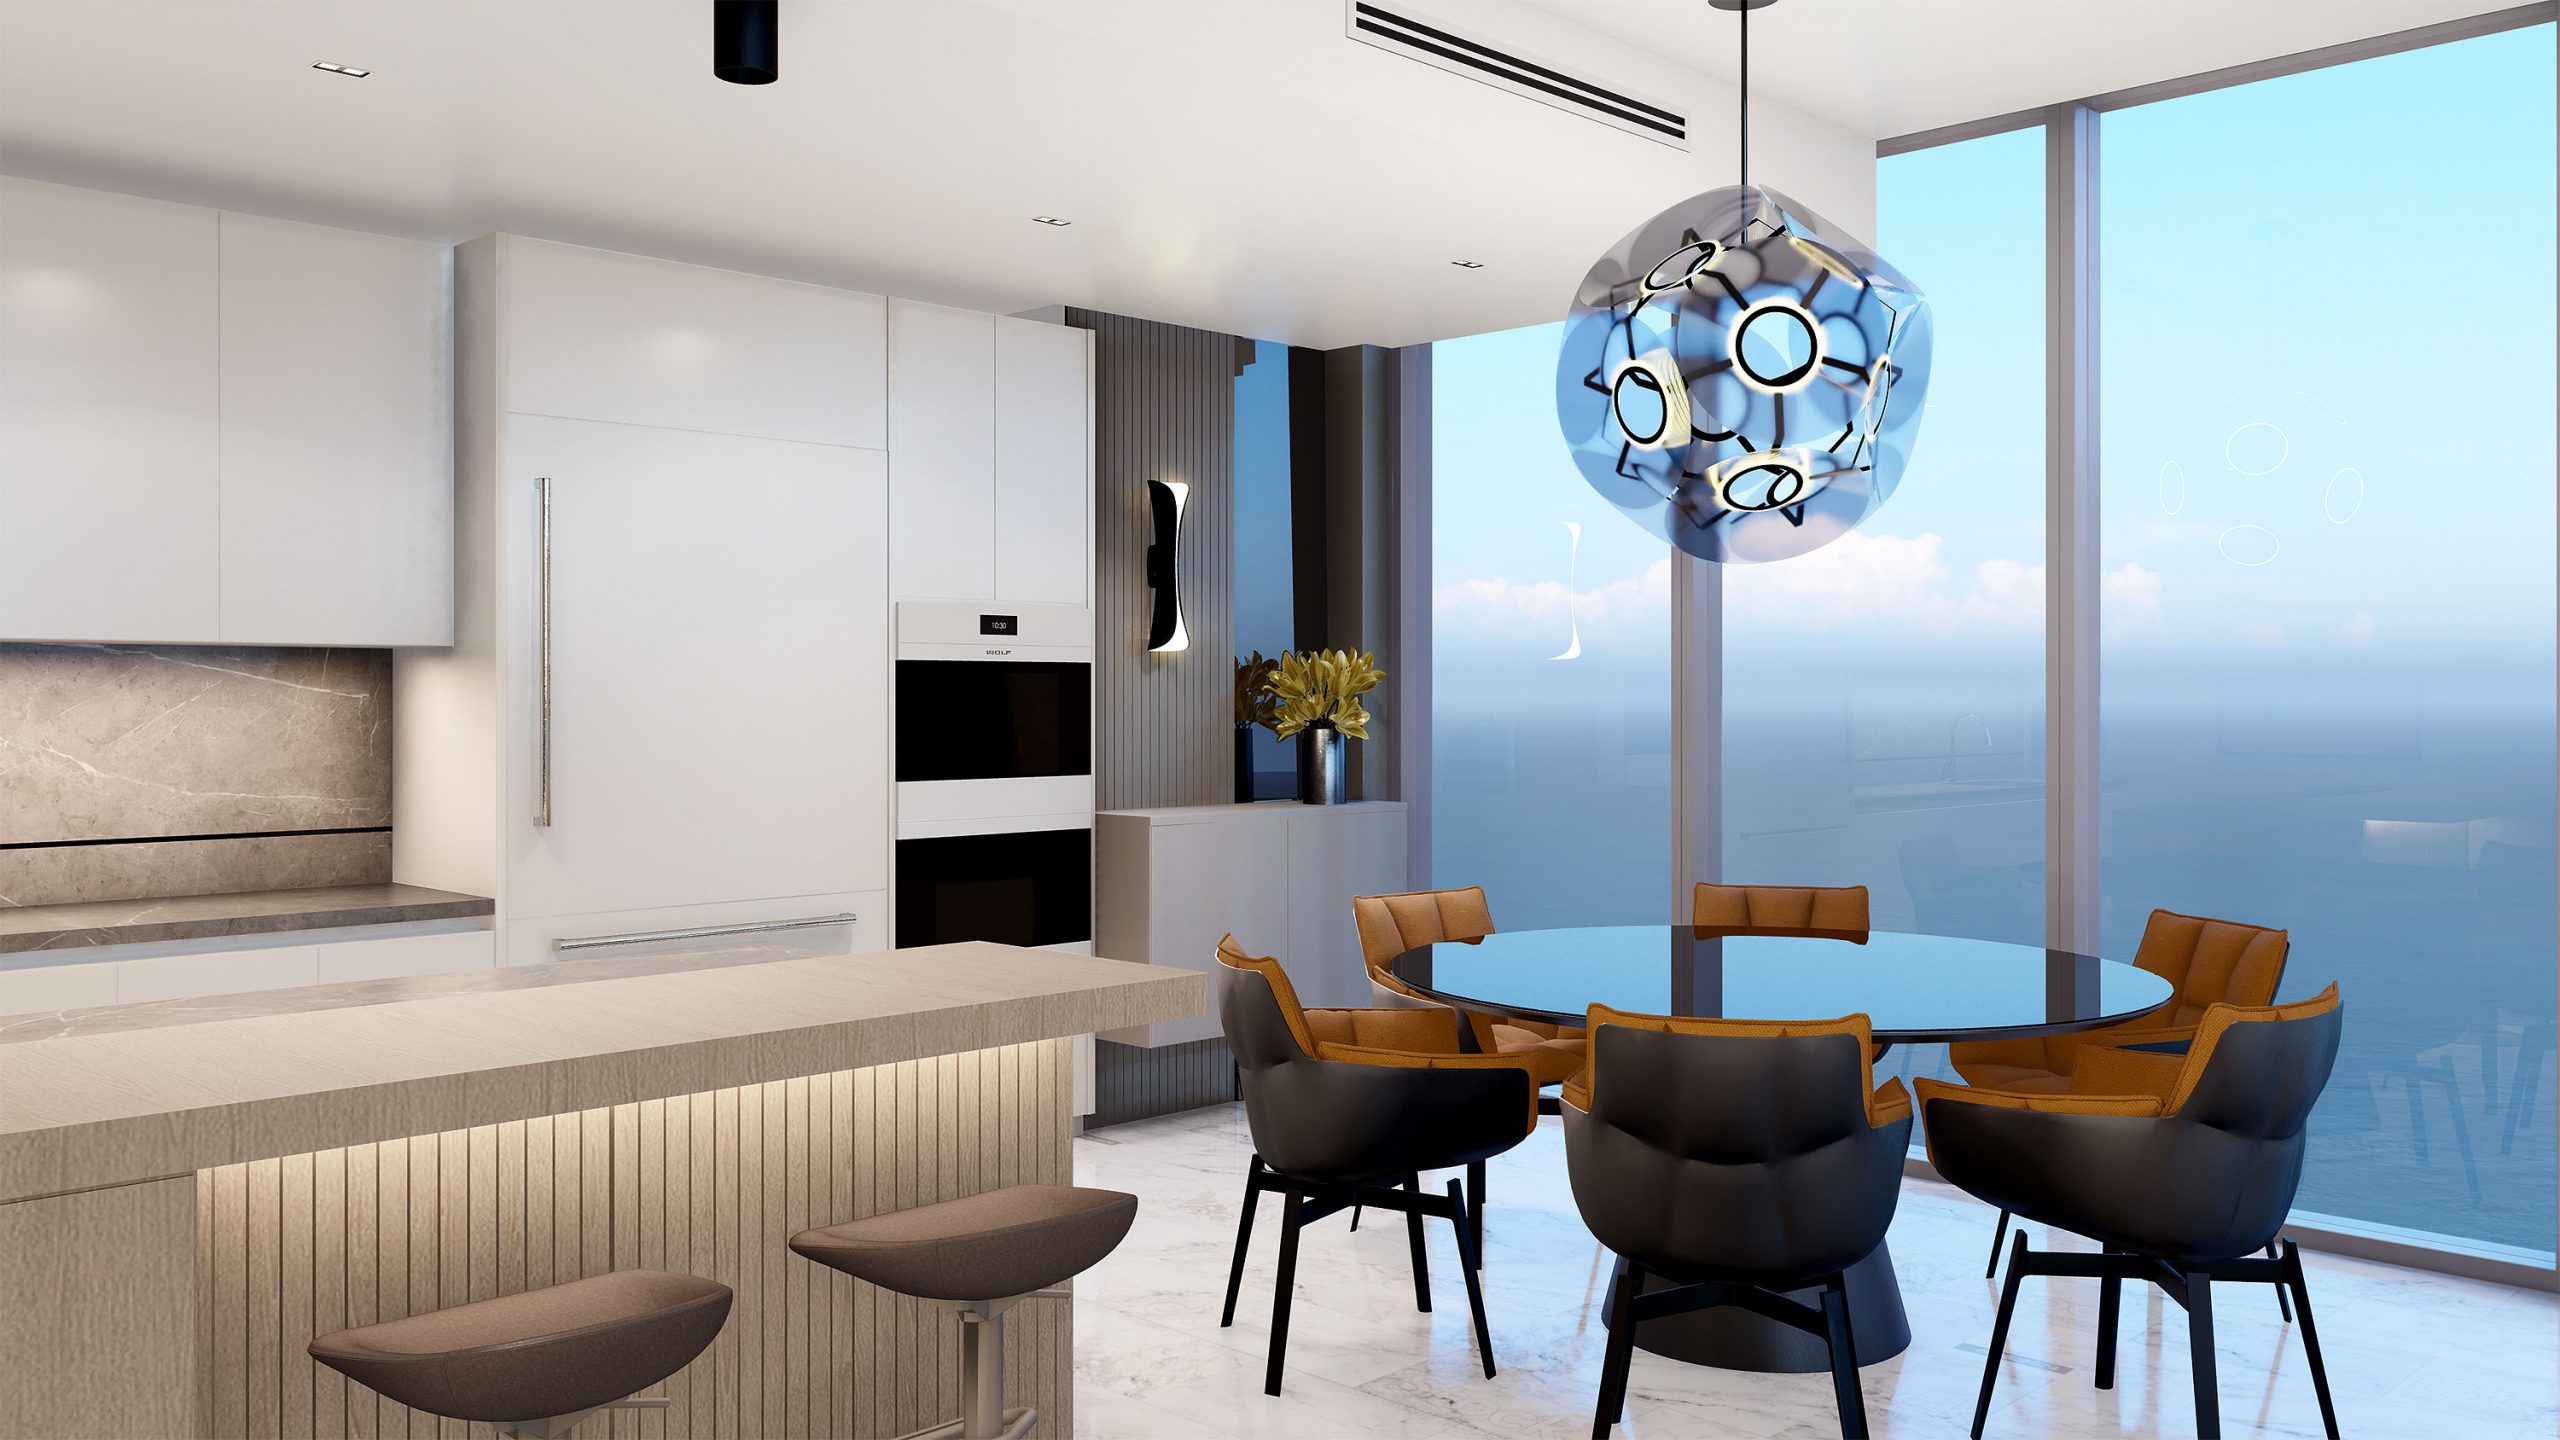 Sleek design dining room and integrated kitchen, black and orange organic design dining chairs, black round dining table, futuristic glass chandelier, white marble floor, ash wood counter, and kitchen in the background with white cabinets and light gray marble backsplash